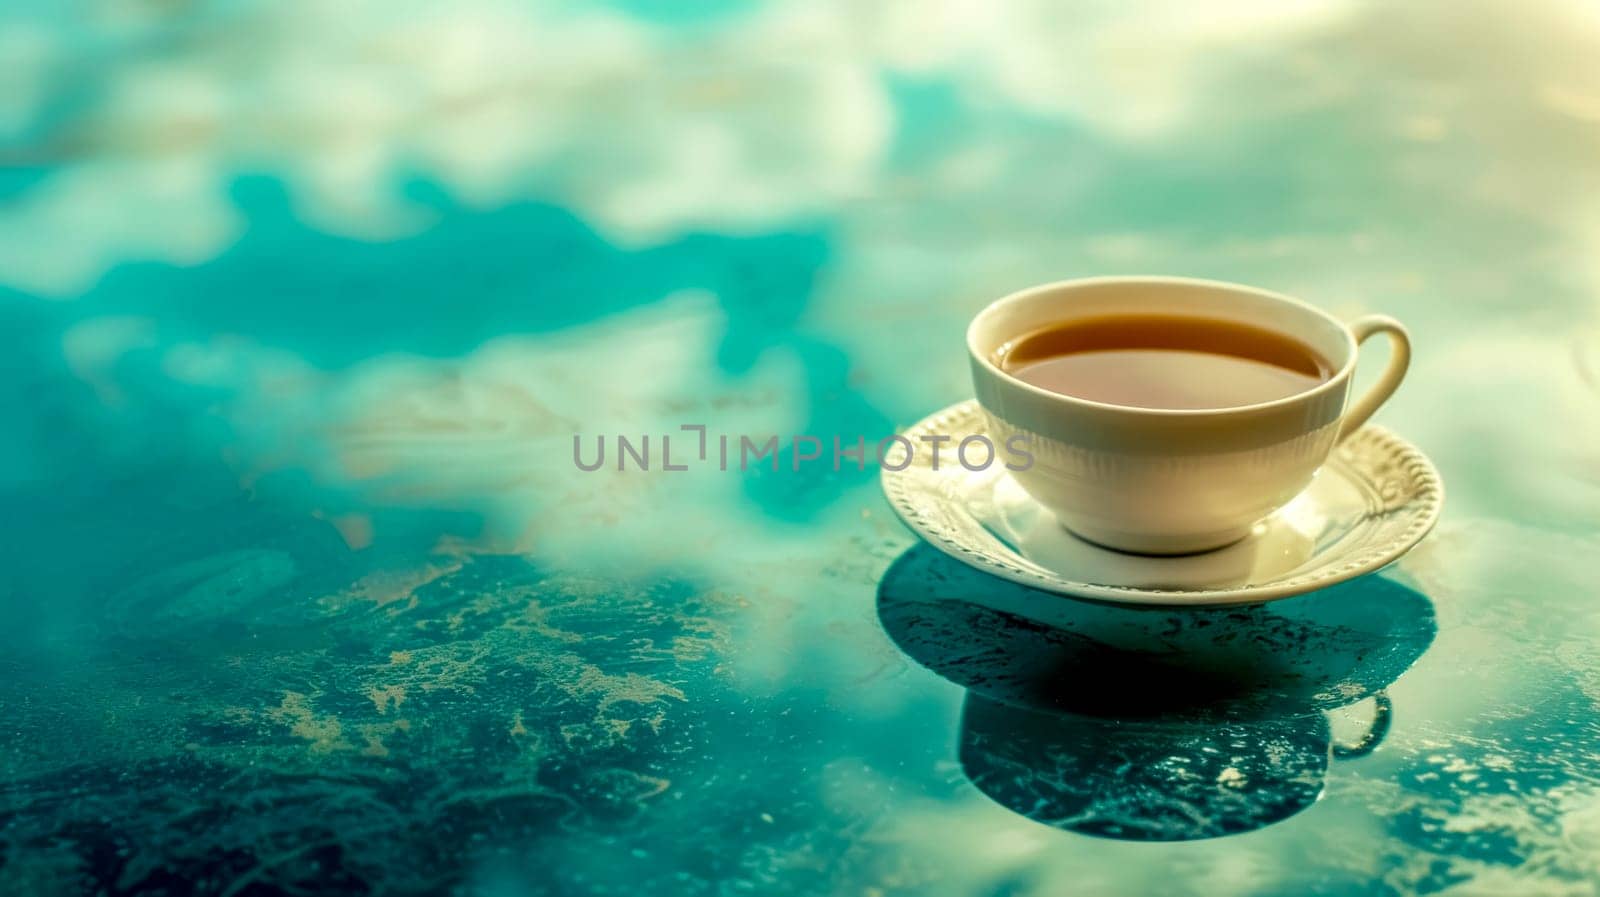 Tranquil scene with a white teacup full of tea on a reflective aqua-toned surface